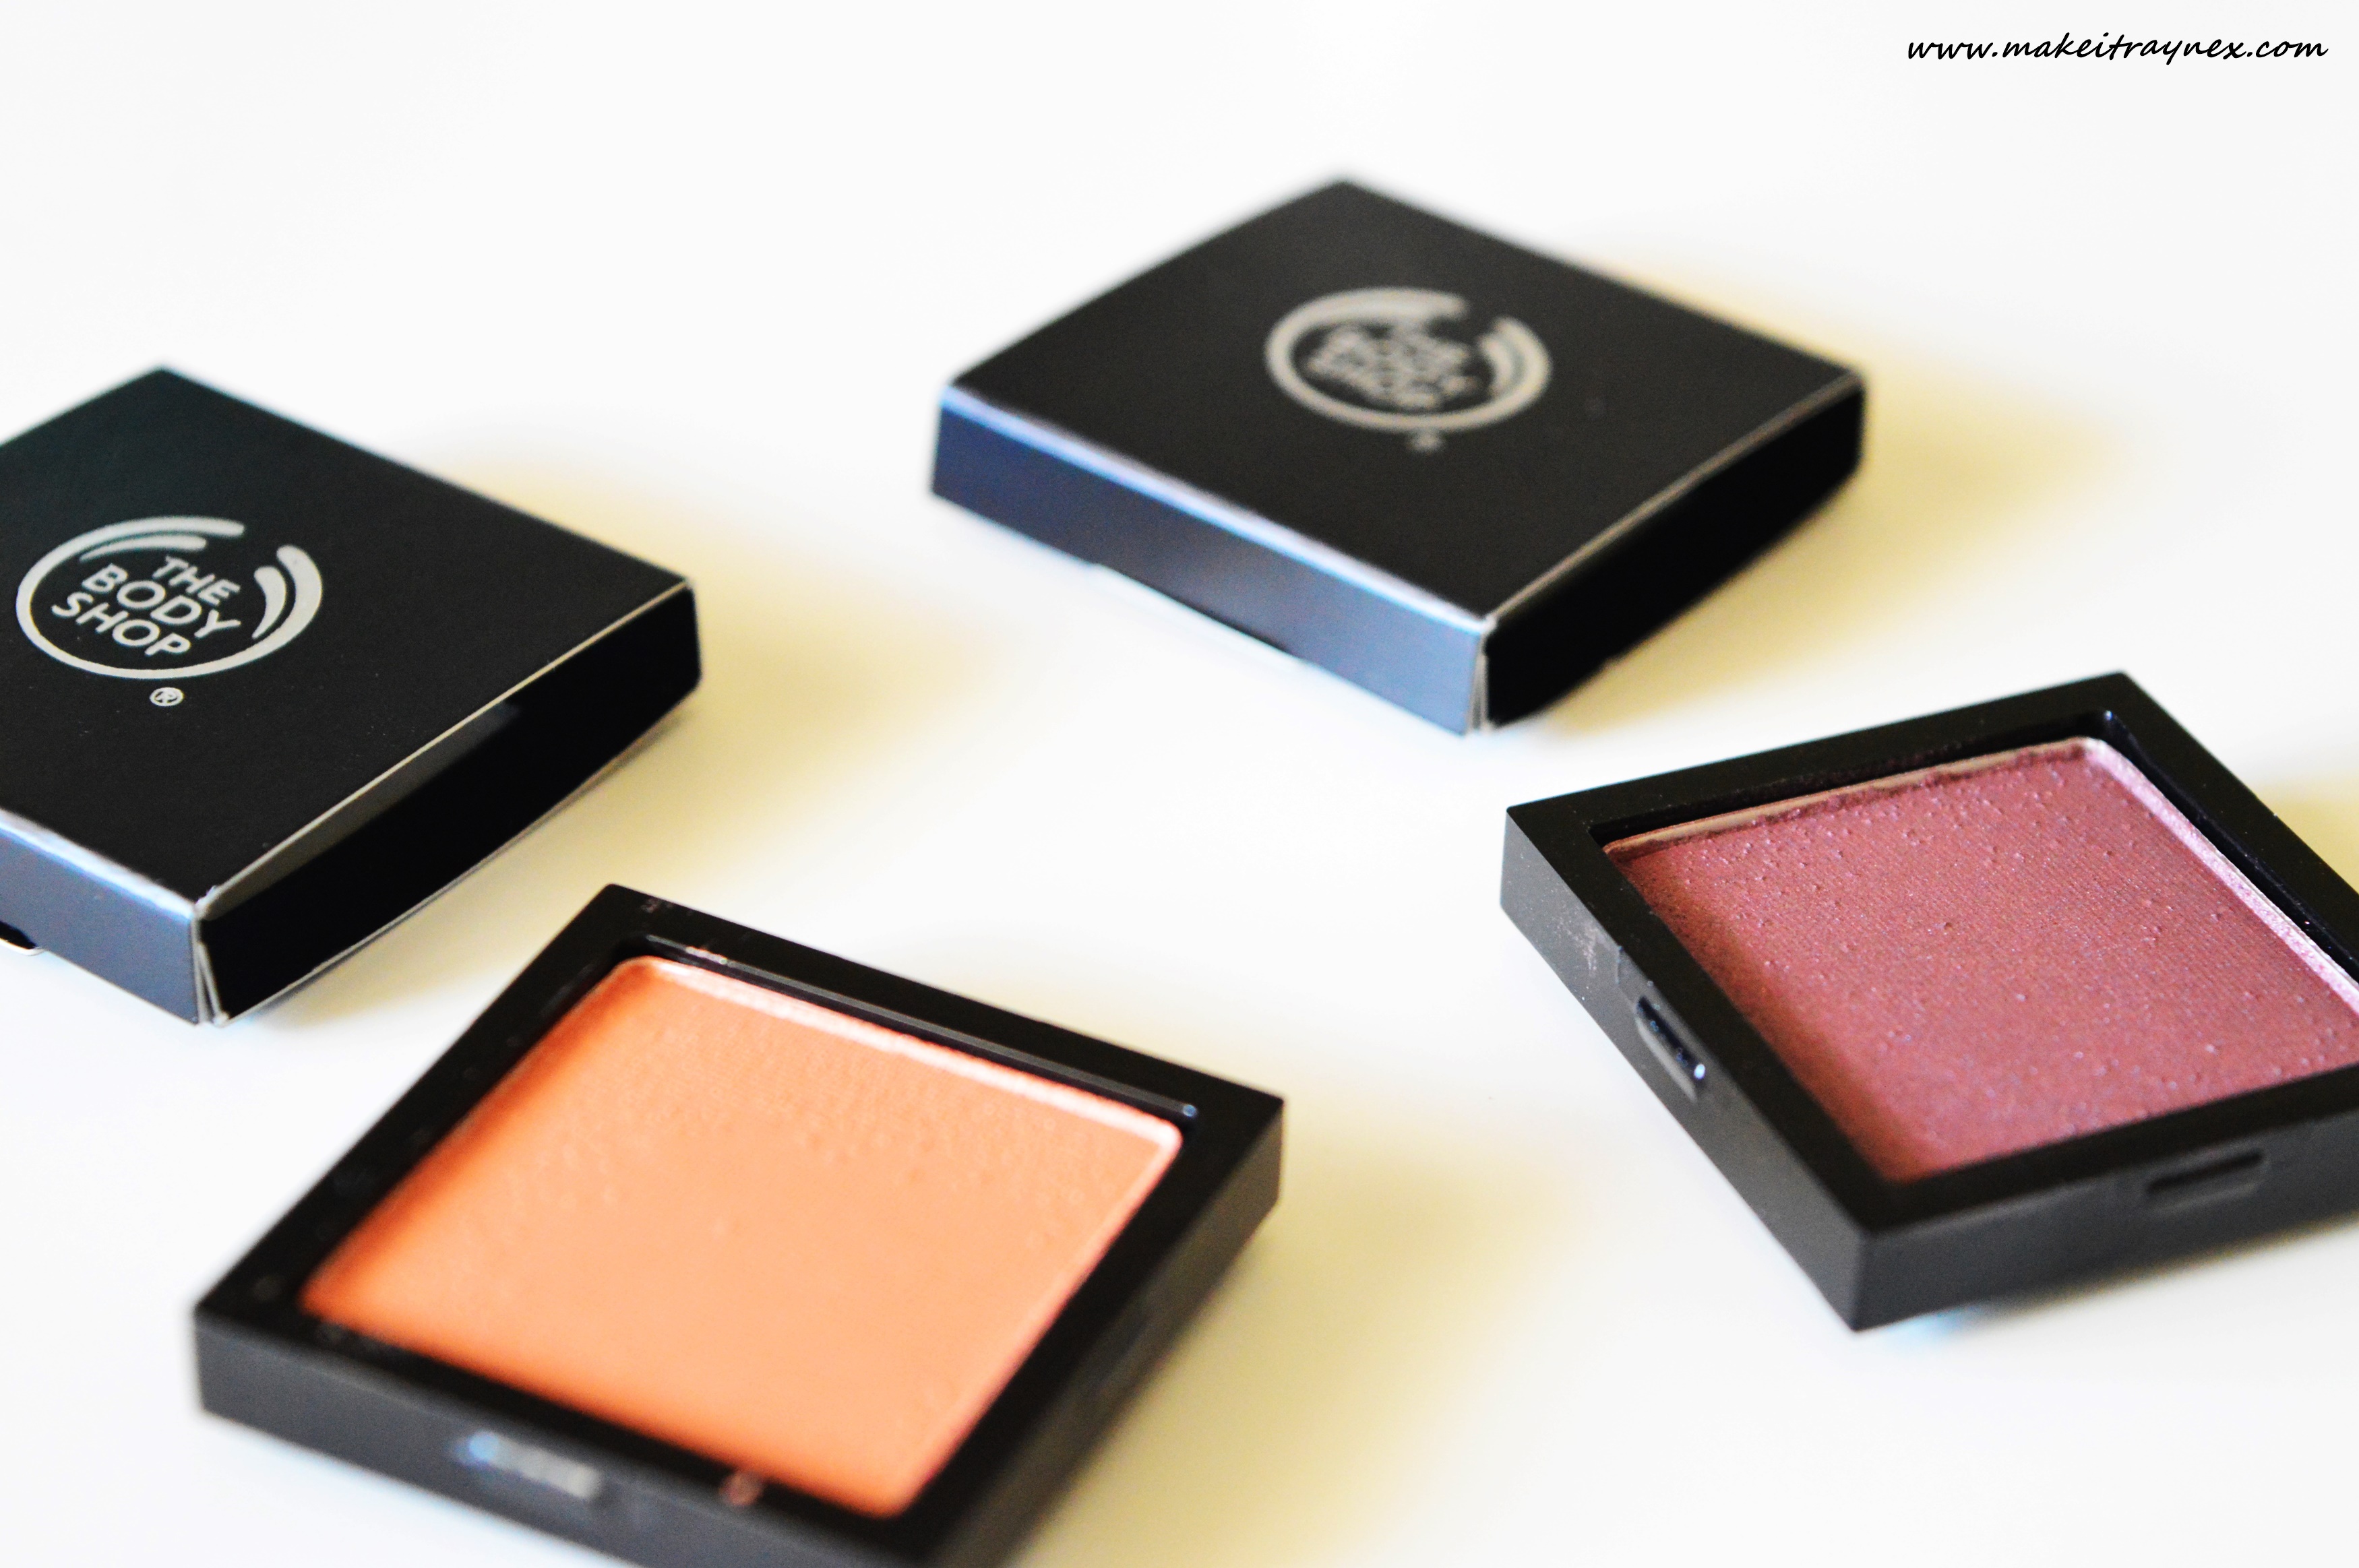 The Body Shop has thirty eye-shadow shades available! {REVIEW}